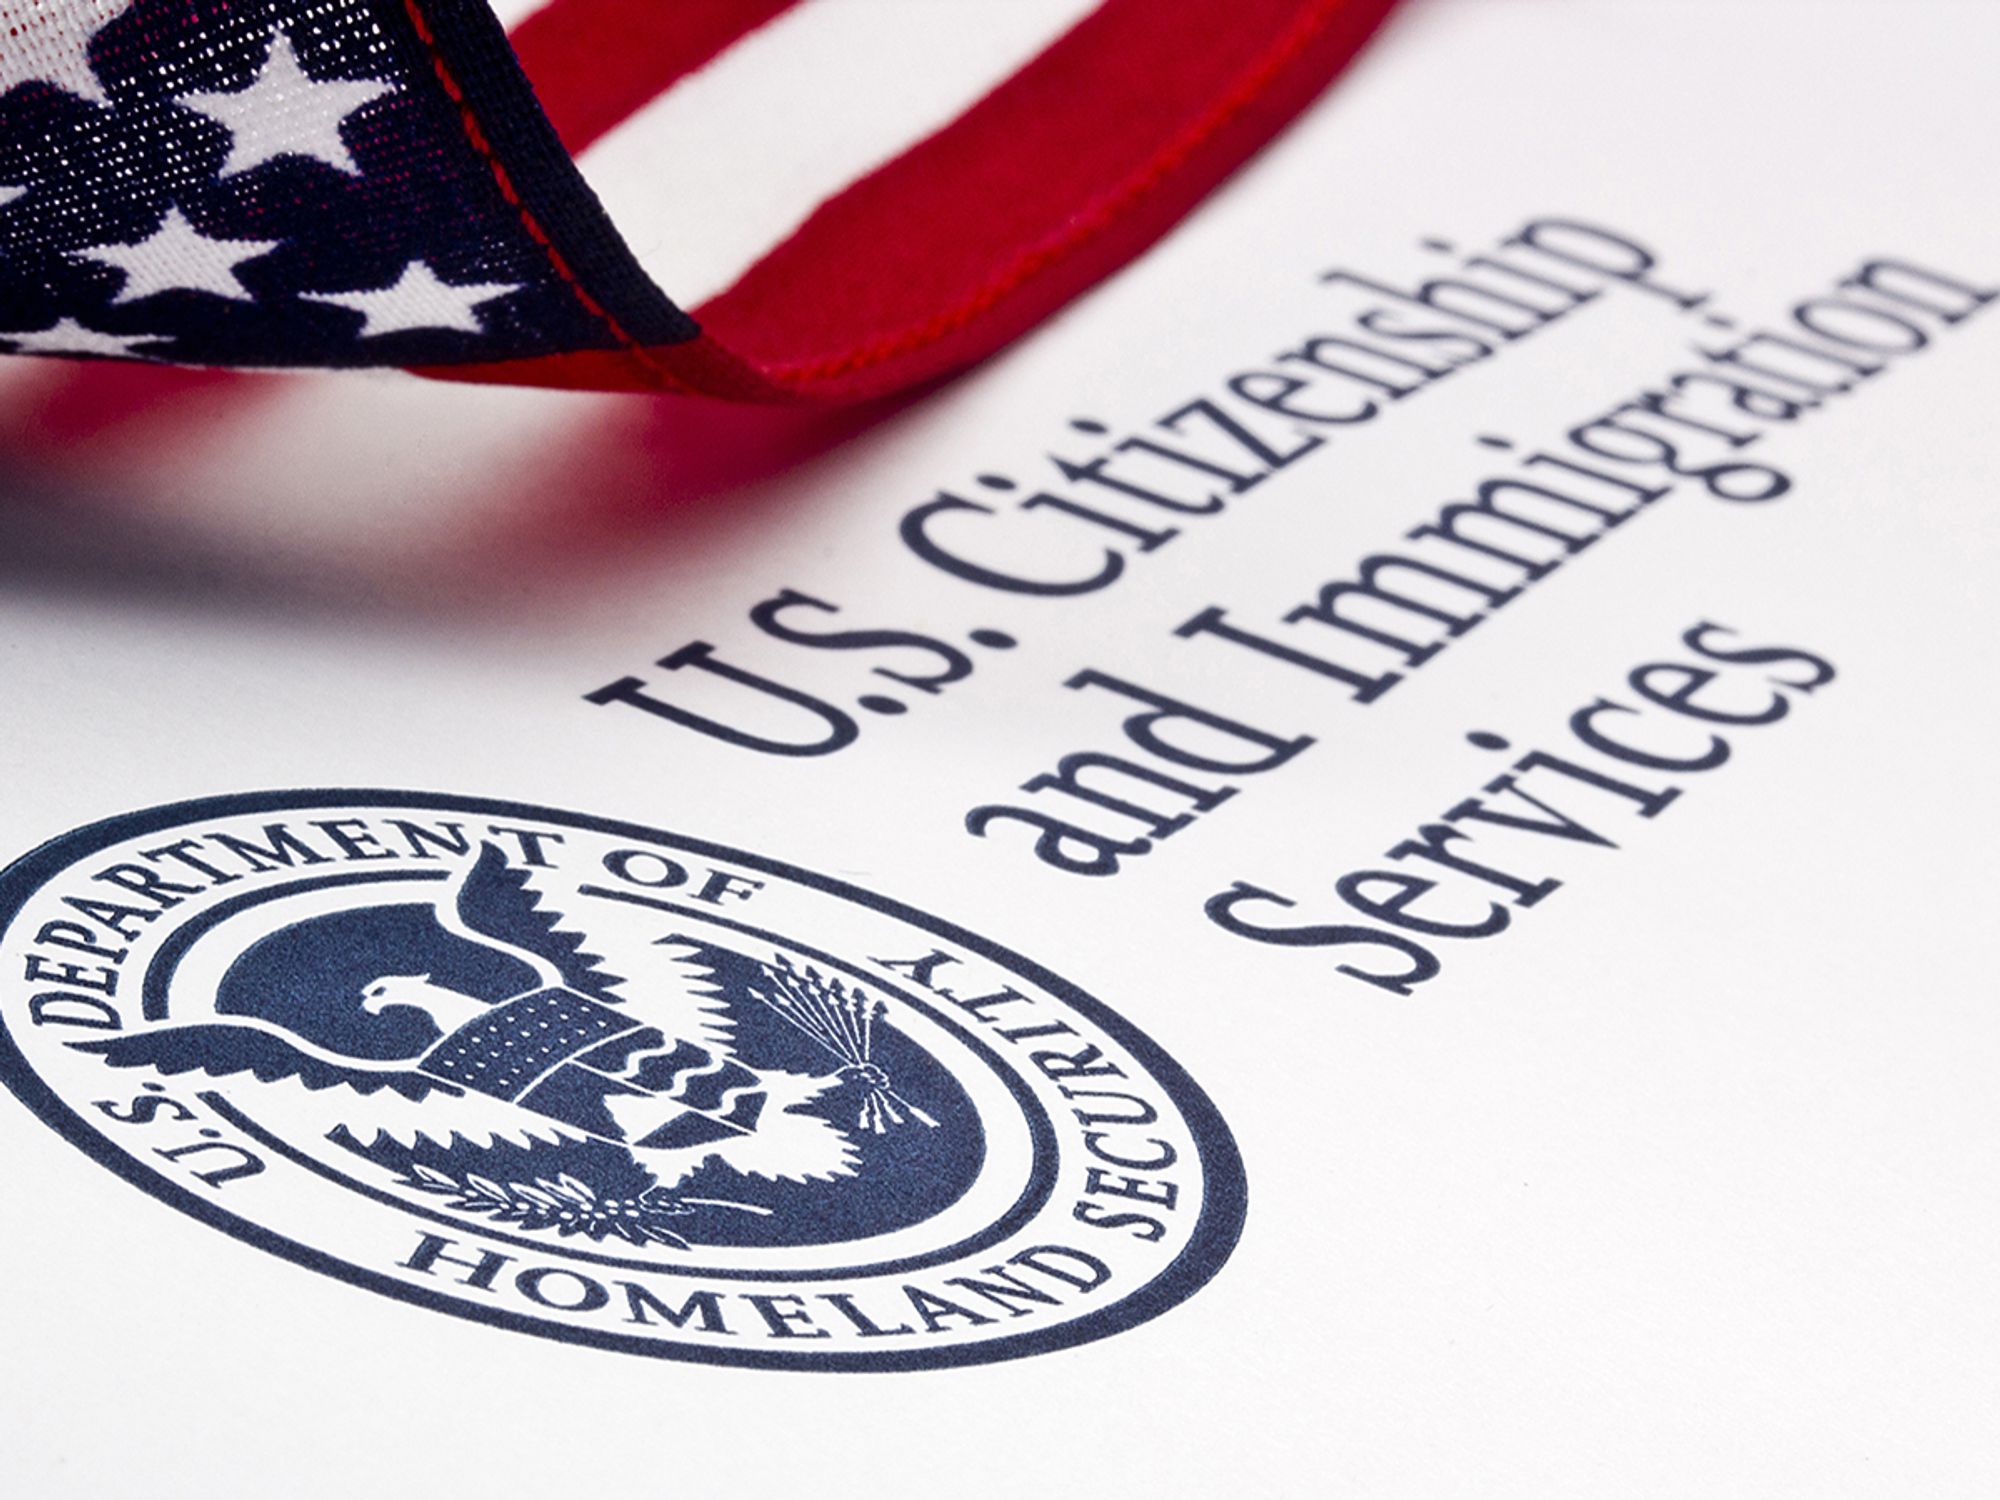 Additional considerations for H-1B visas